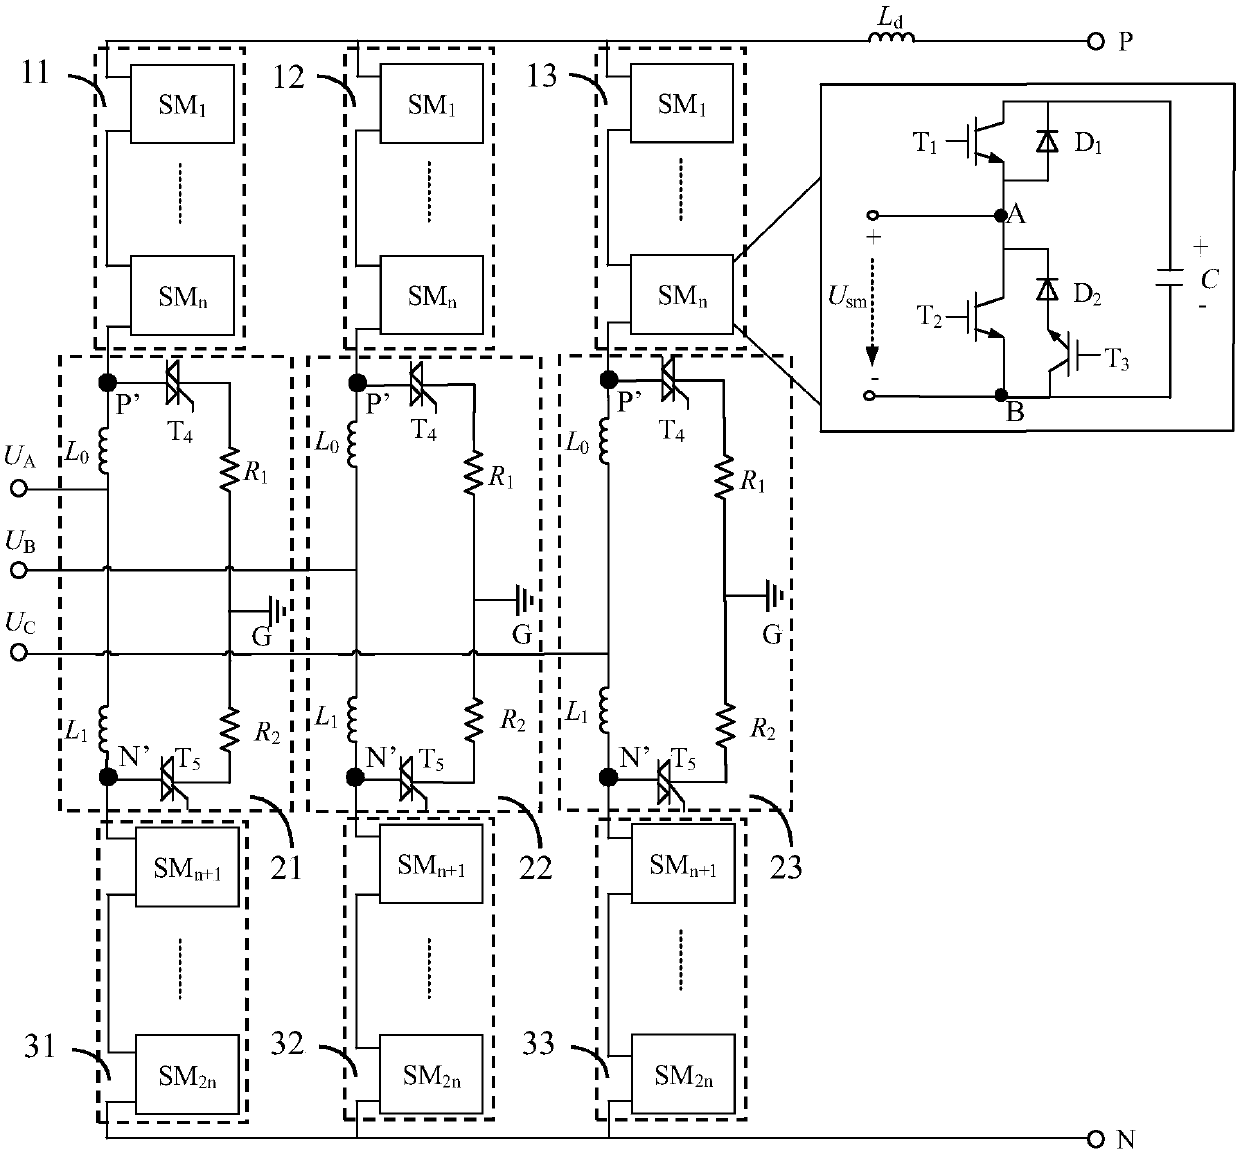 MMC topology with DC short circuit fault current blocking ability